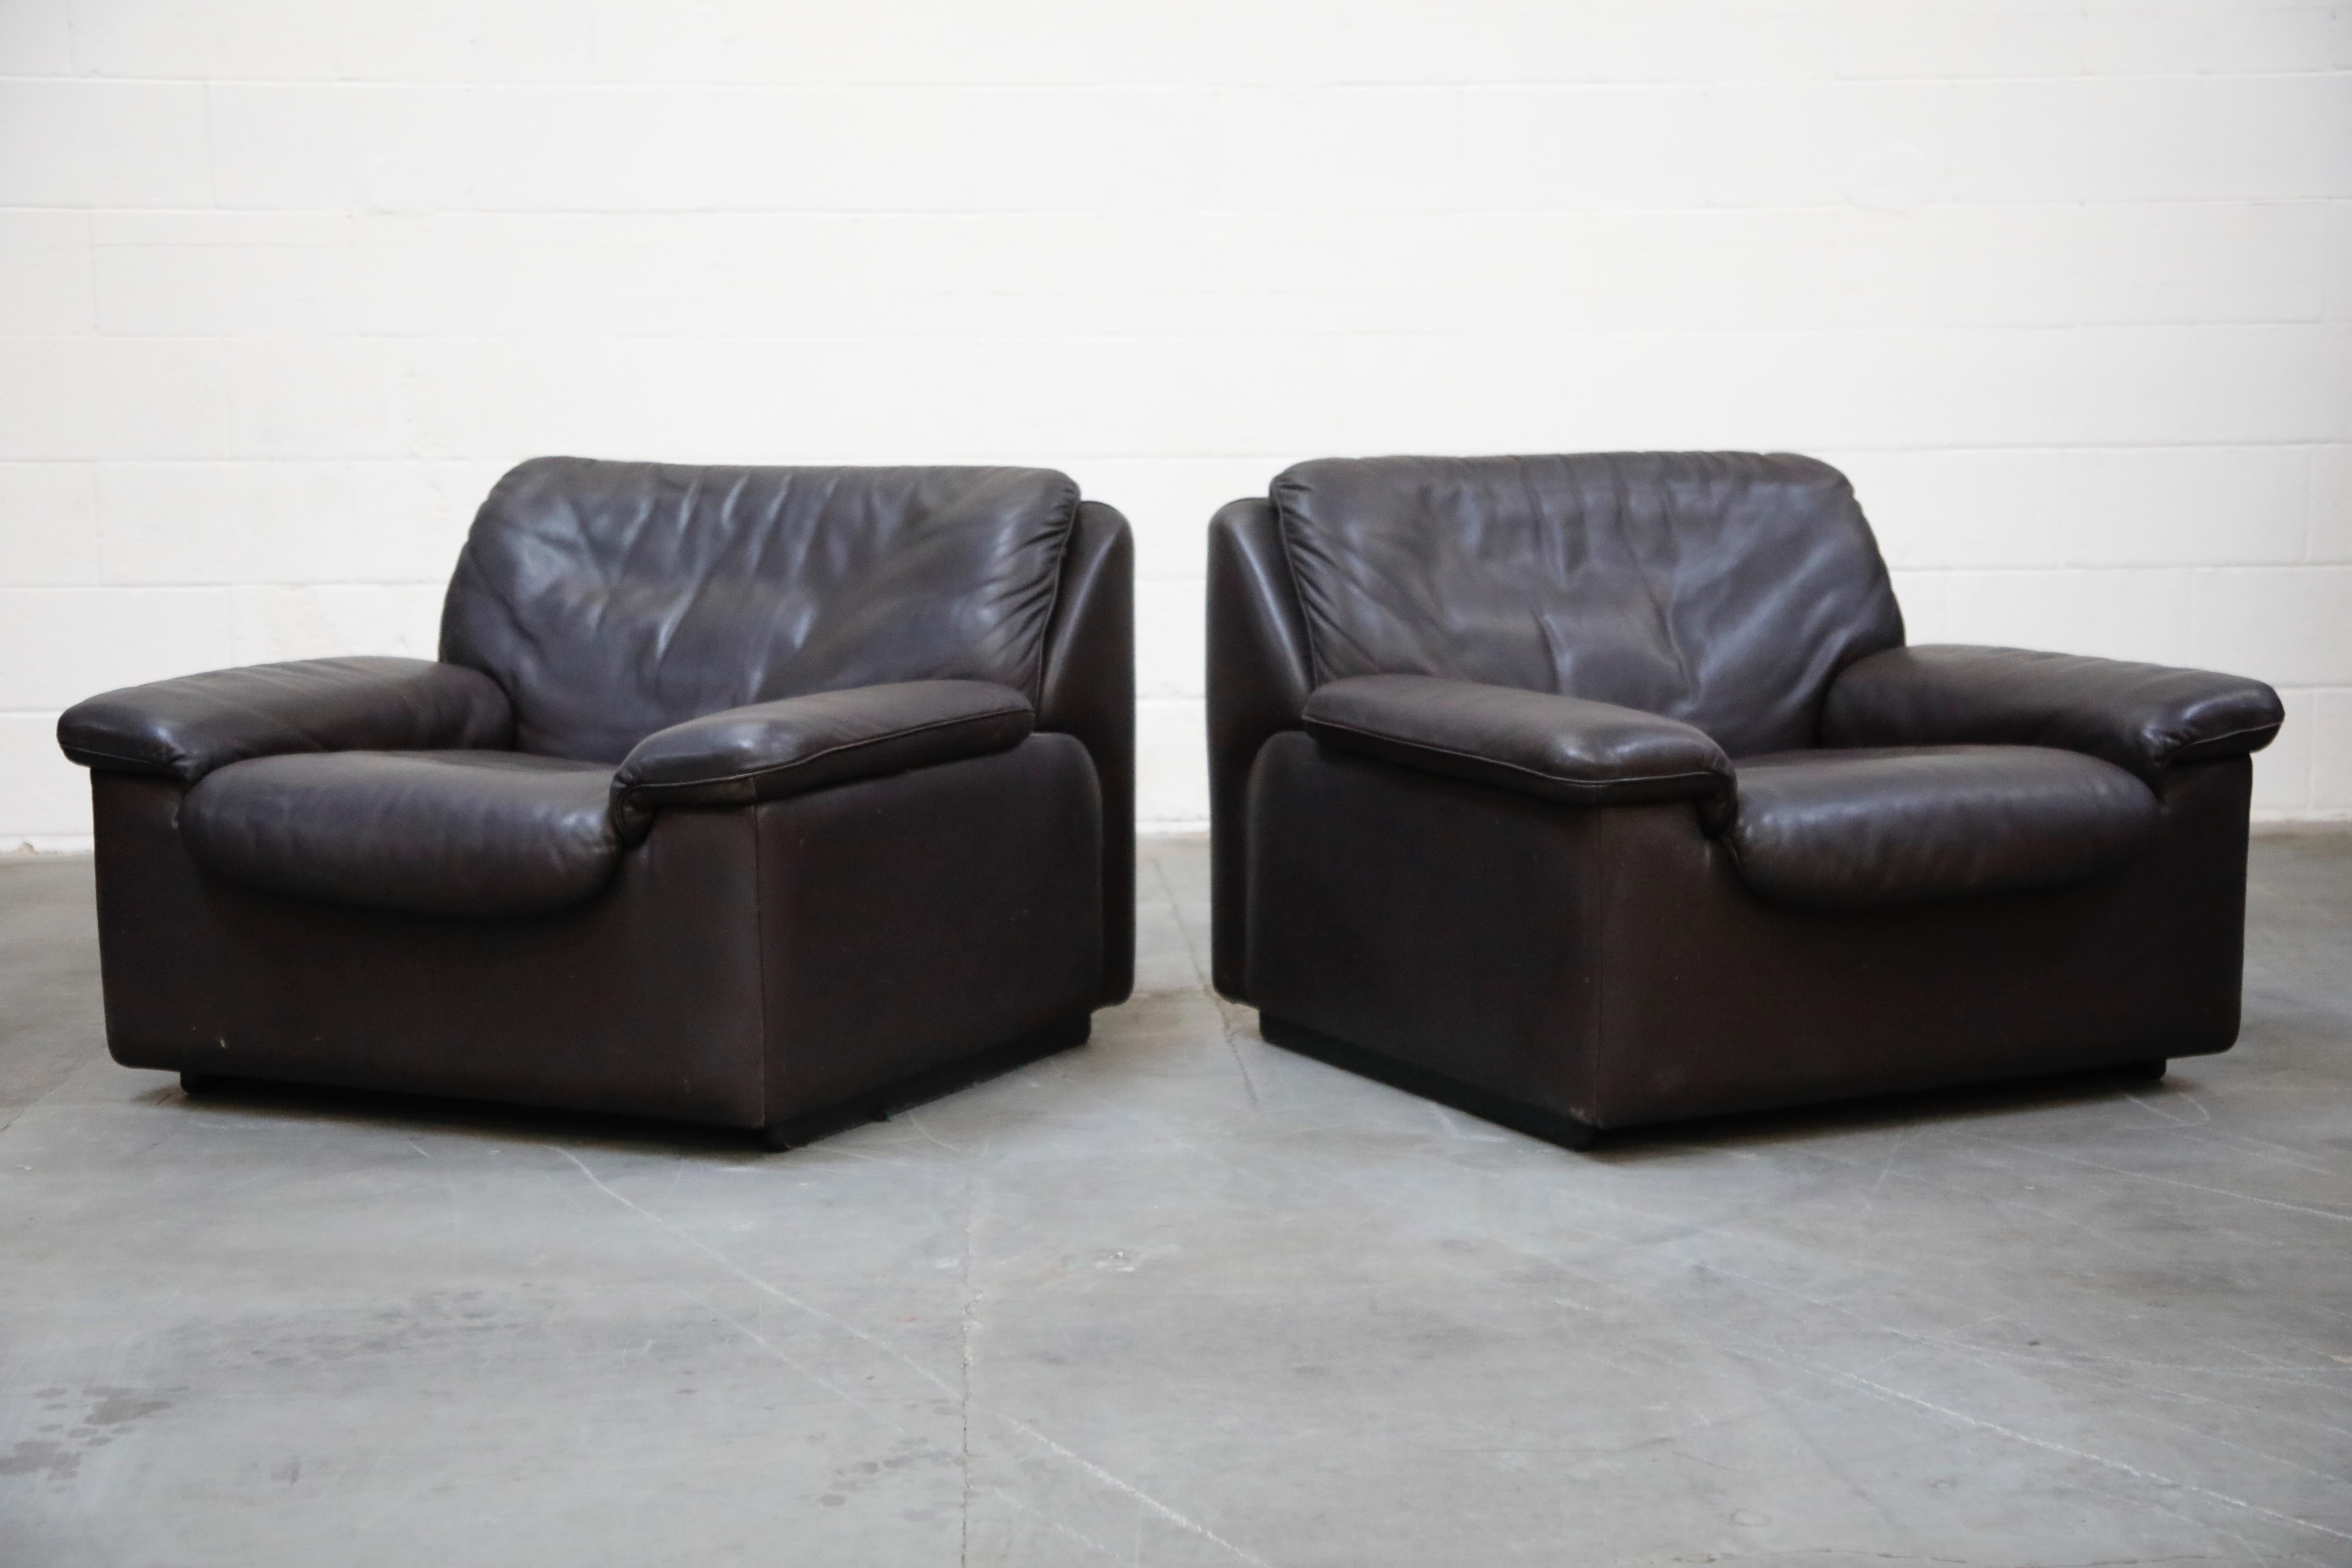 Swiss Pair of Leather Lounge Armchairs by De Sede, Switzerland, 1960s, Signed